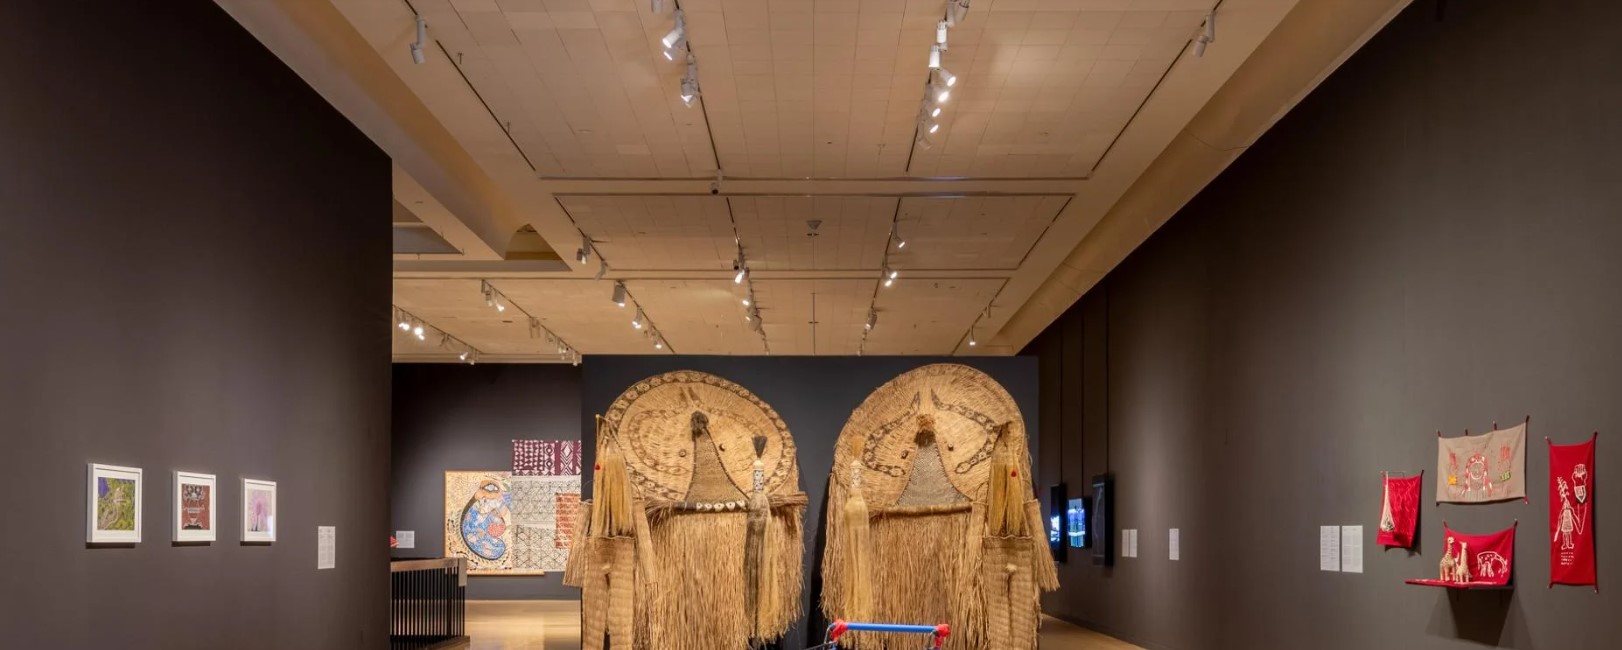 Contemporary Indigenous Art of Brazil Comes to Tufts